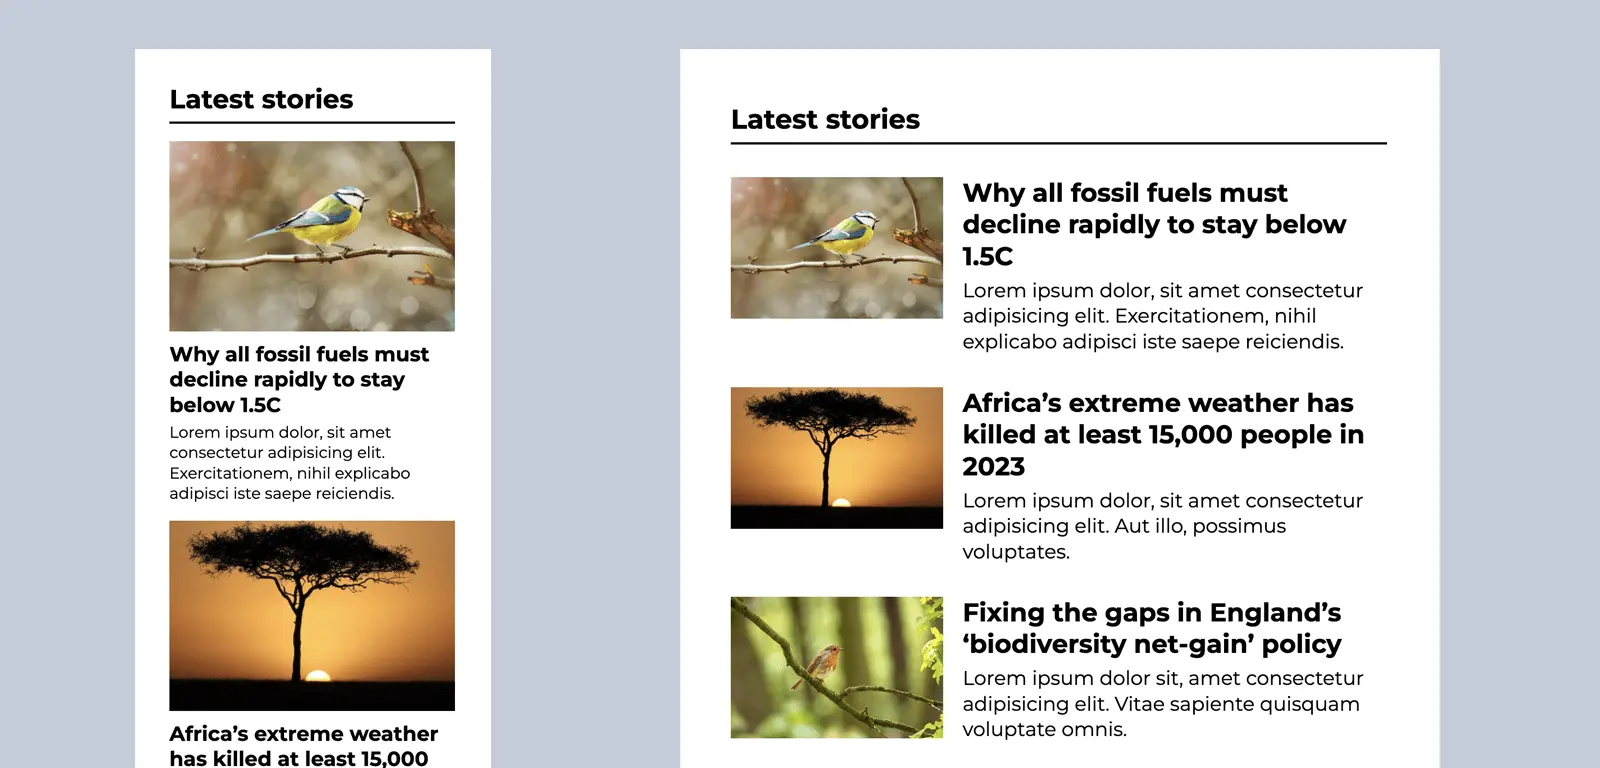 Mobile and tablet versions of the news feed layout